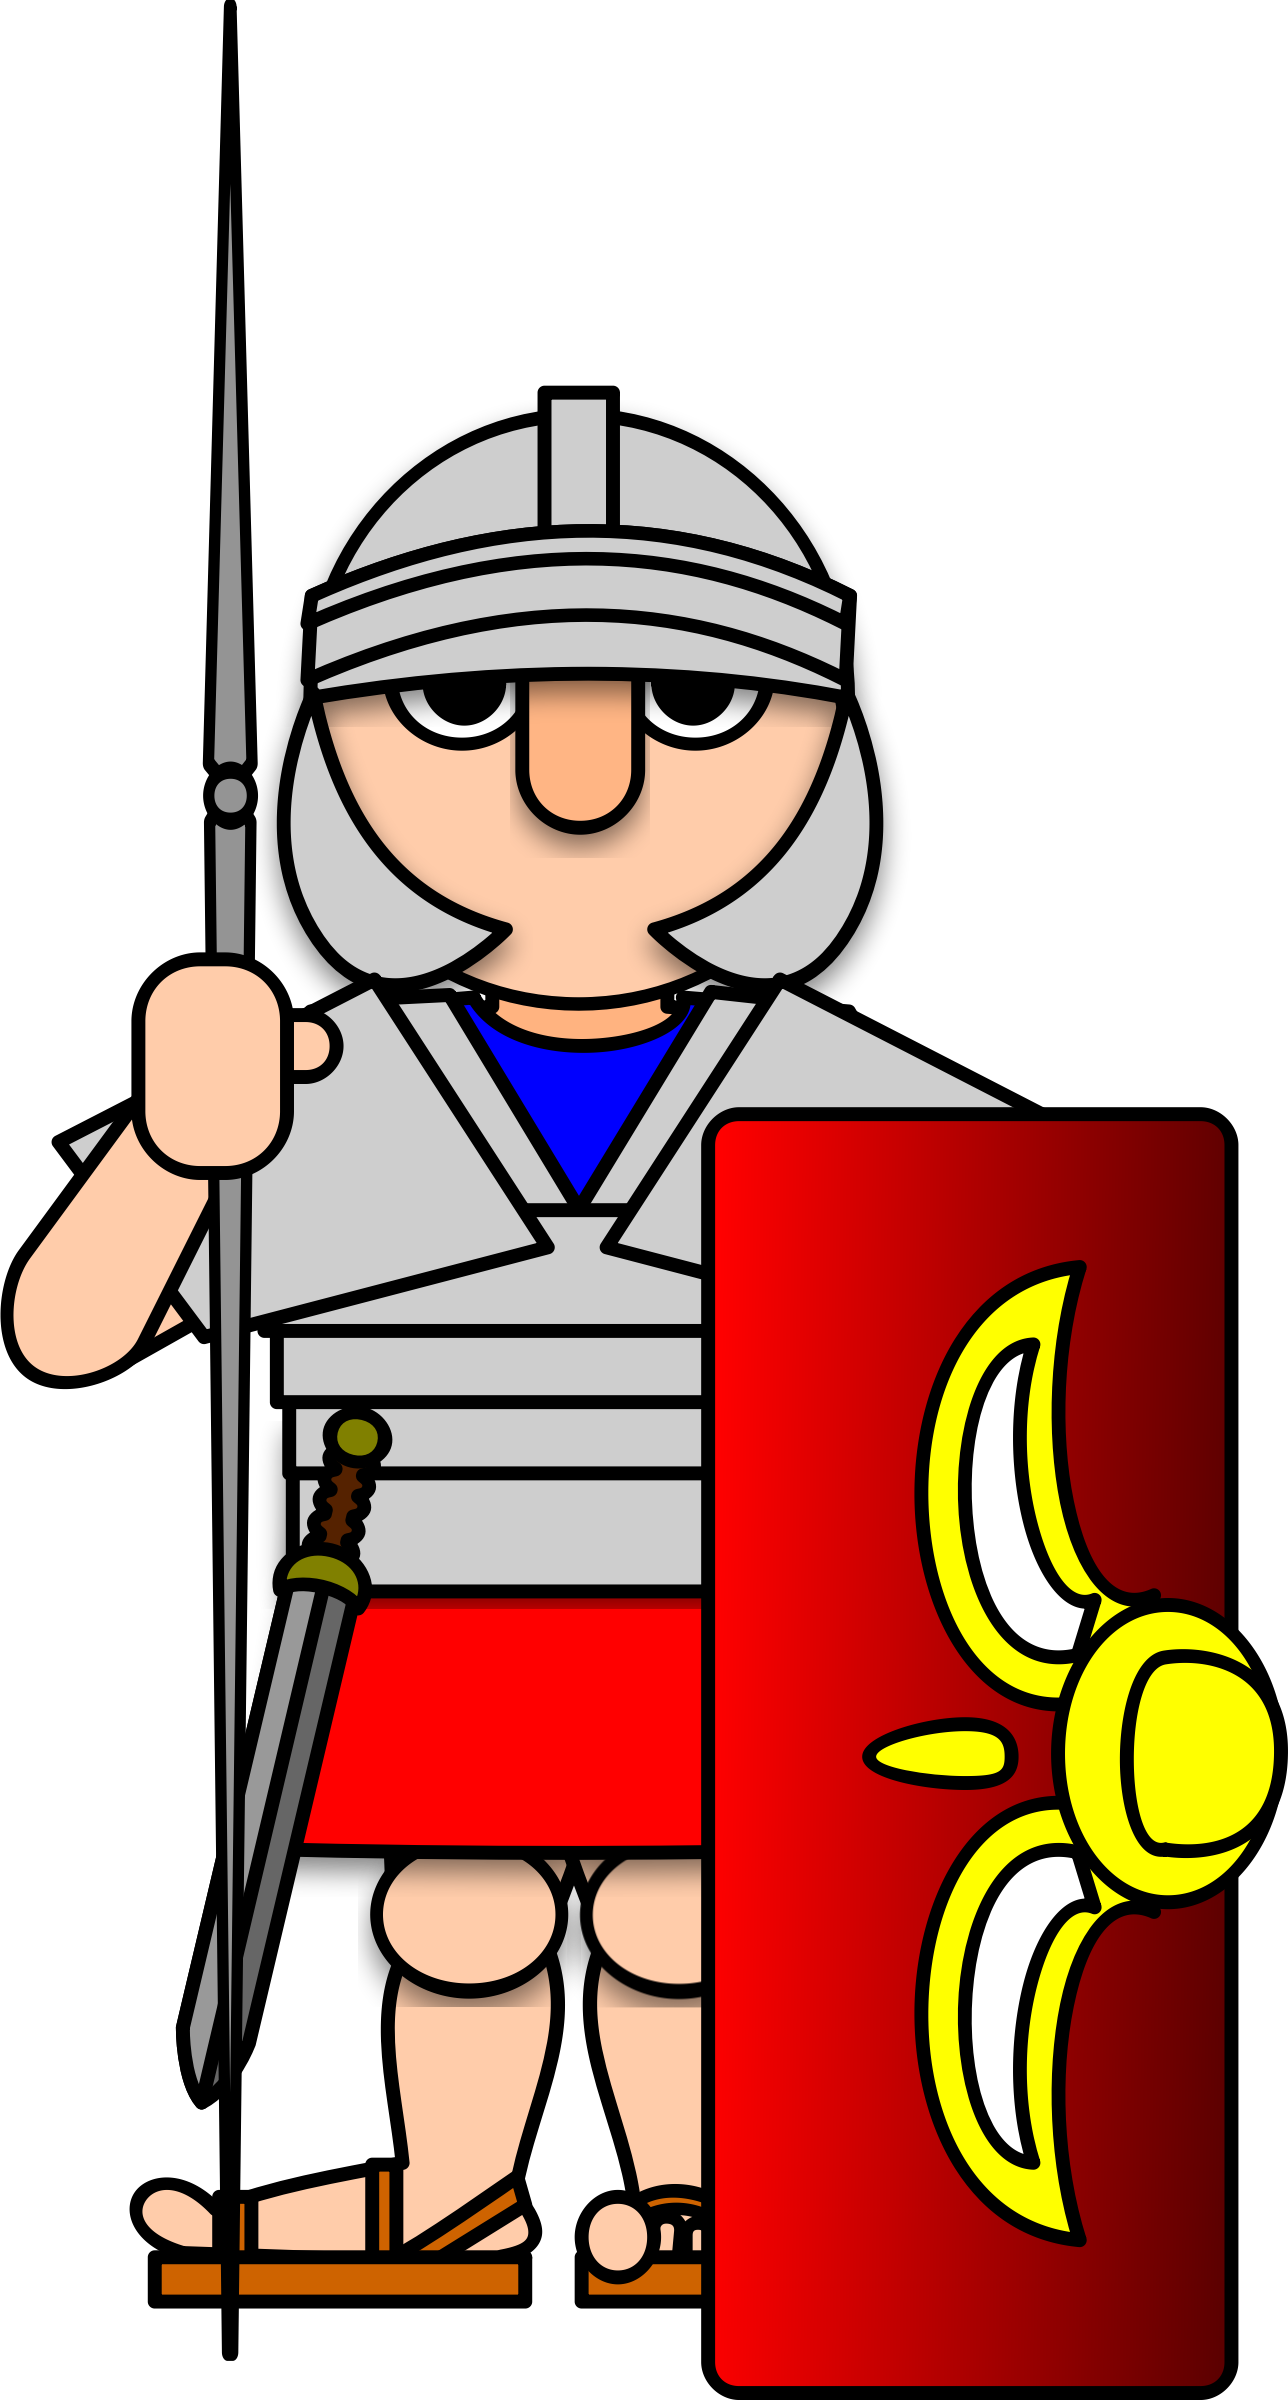 Roman soldier clipart - Clipground